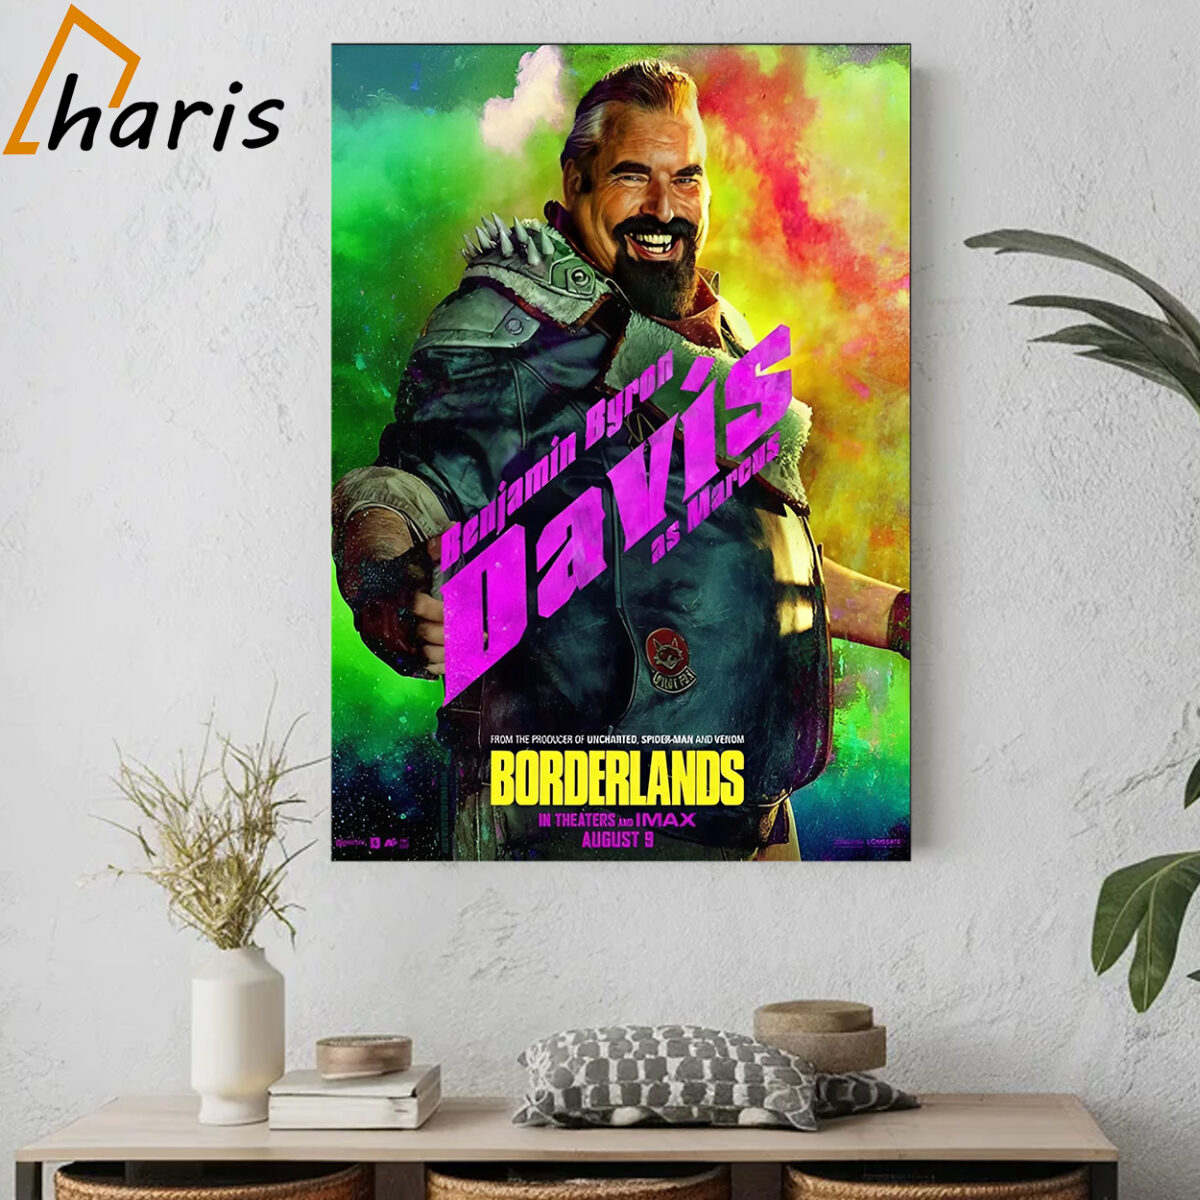 New Character Marcus Posters For Borderlands Releasing In Theaters And IMAX On August 9 Poster 2